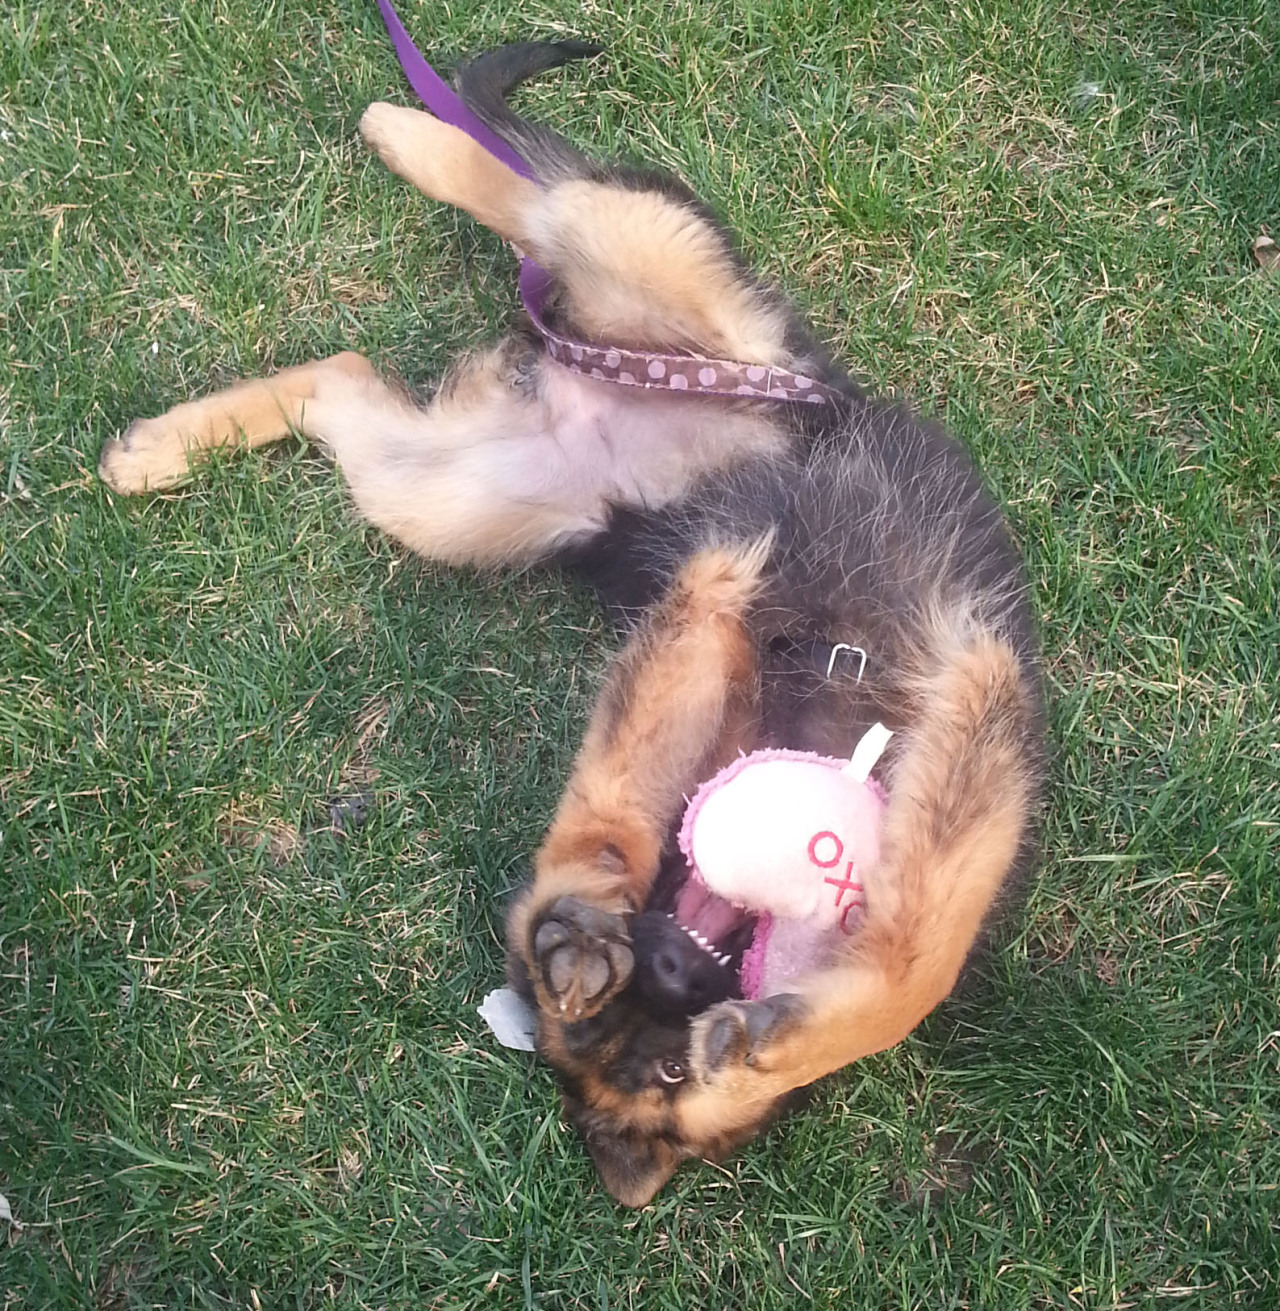 Crazy Puppy Rolling In The Grass German Shepherd Dog Forums